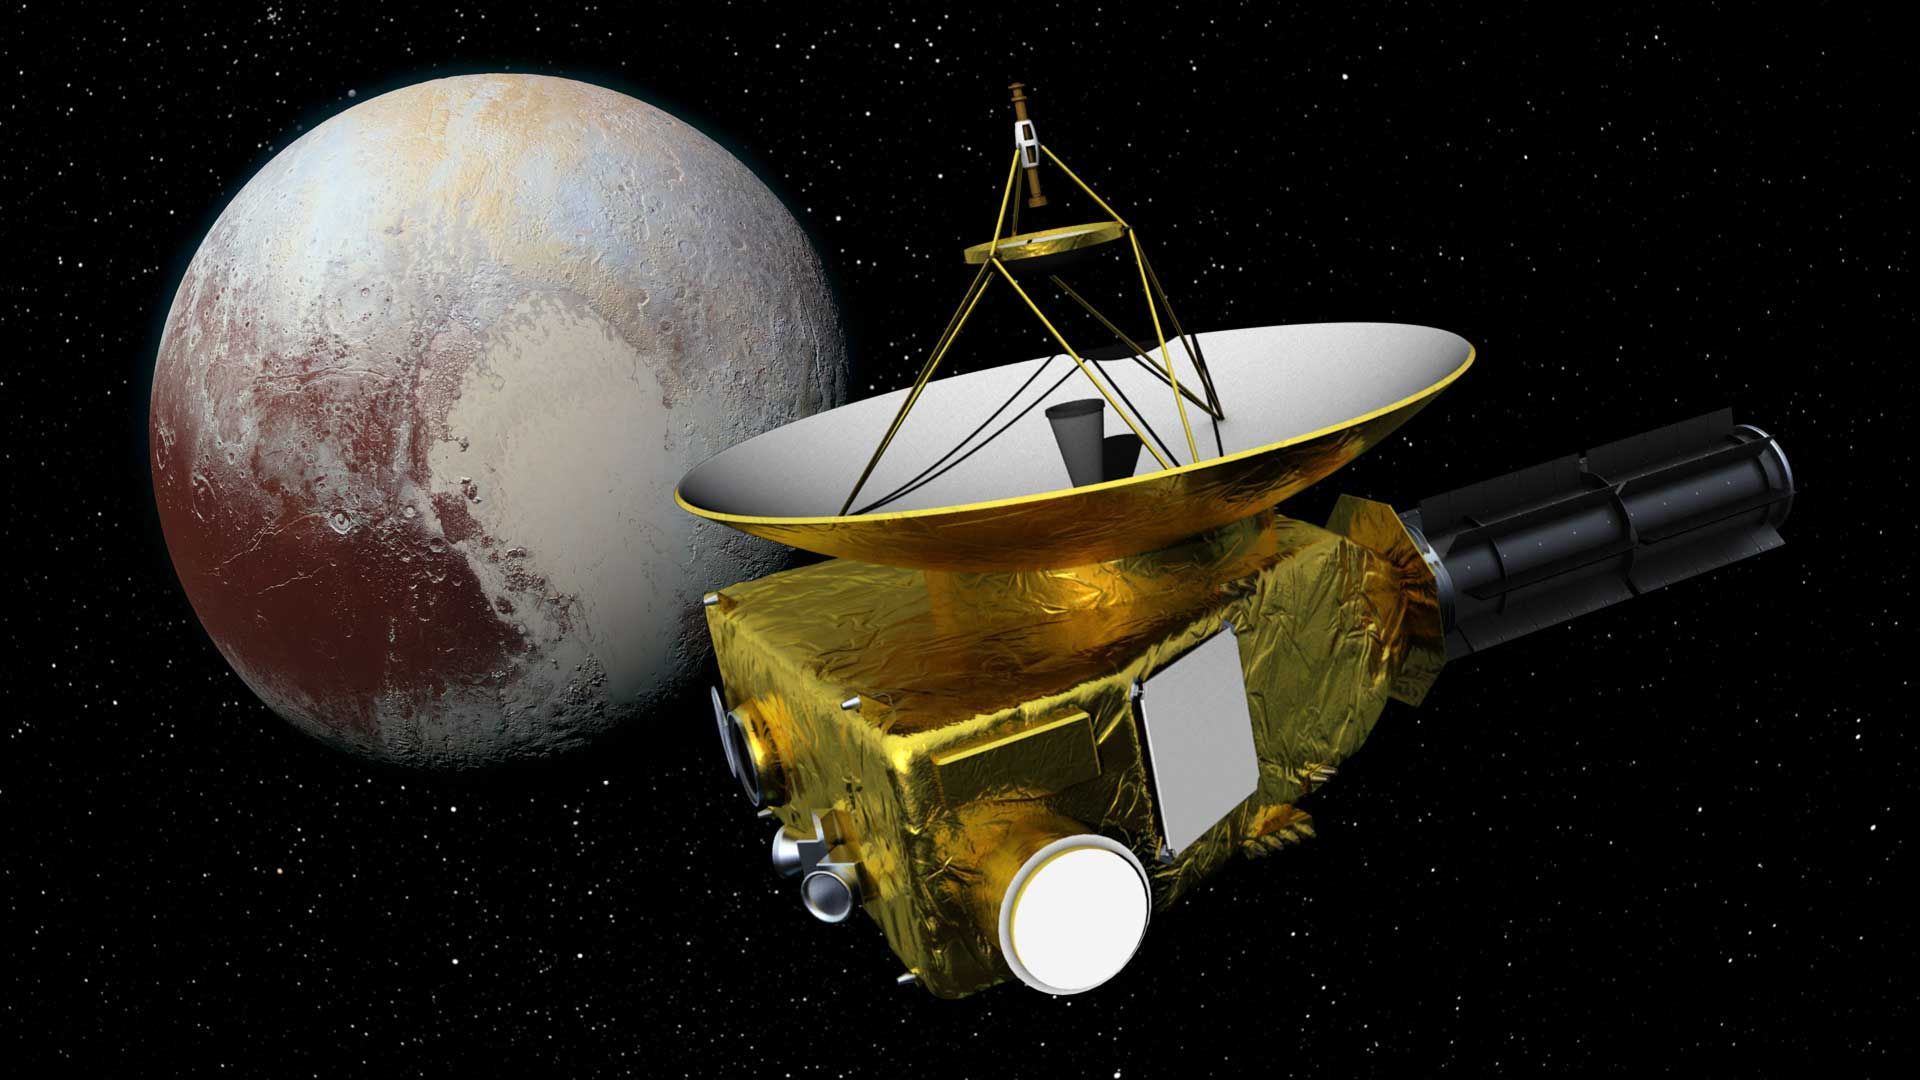 An artist's rendering of the New Horizons spacecraft over Pluto